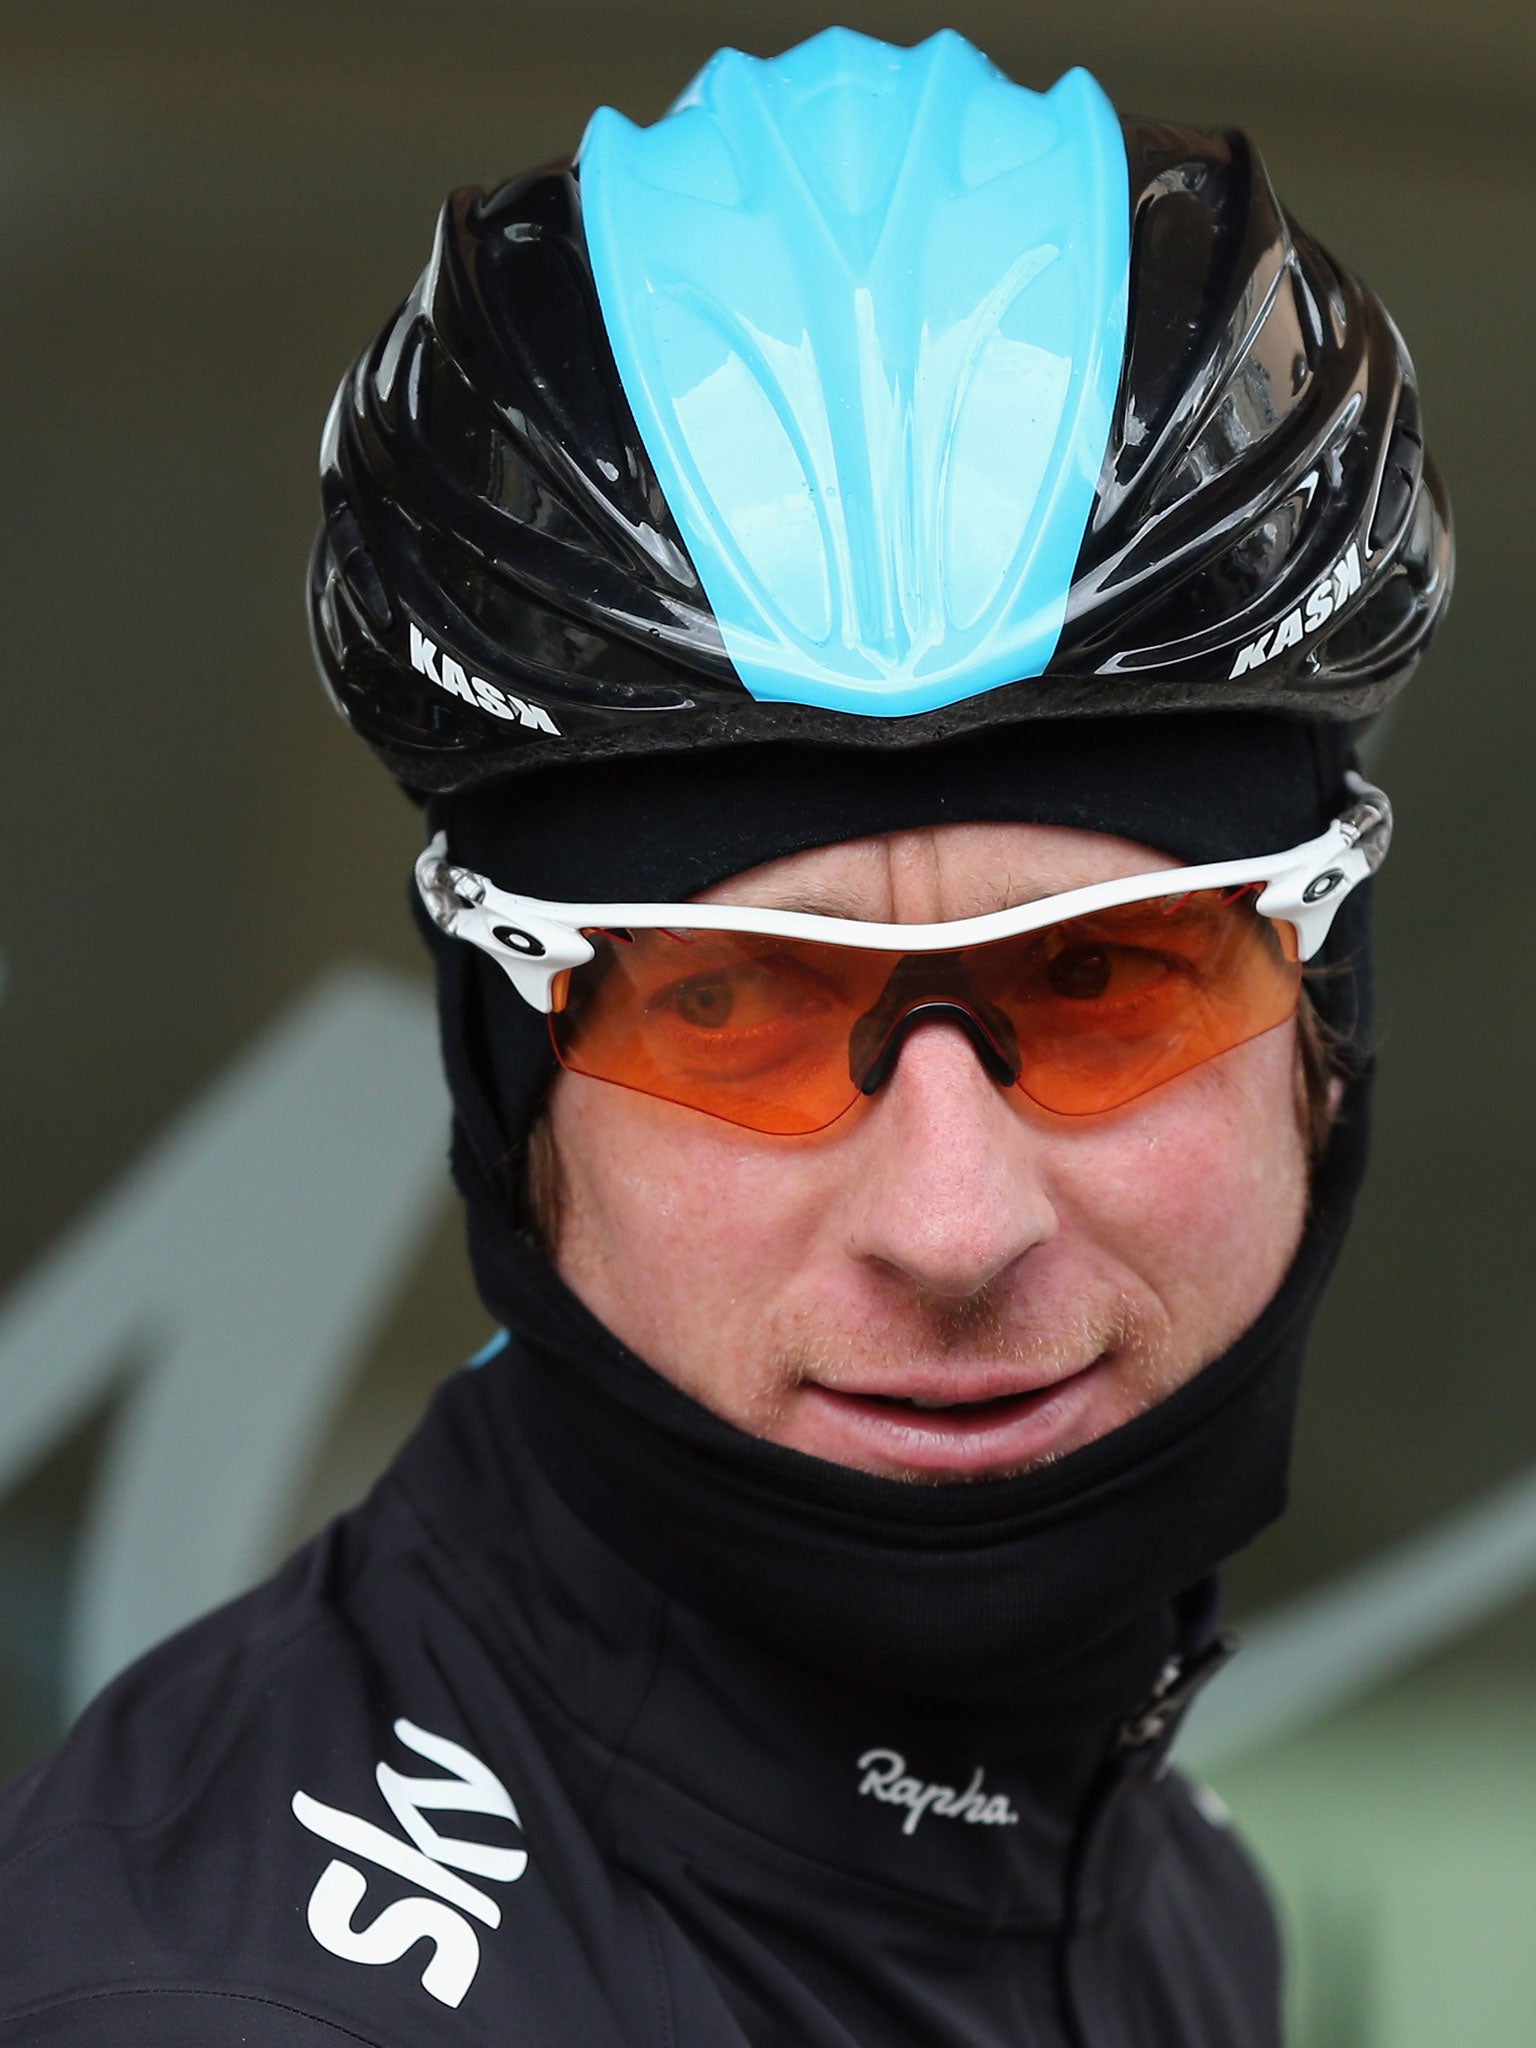 Giro Check: Although he will be reluctant to admit it, Wiggins has his eye on history